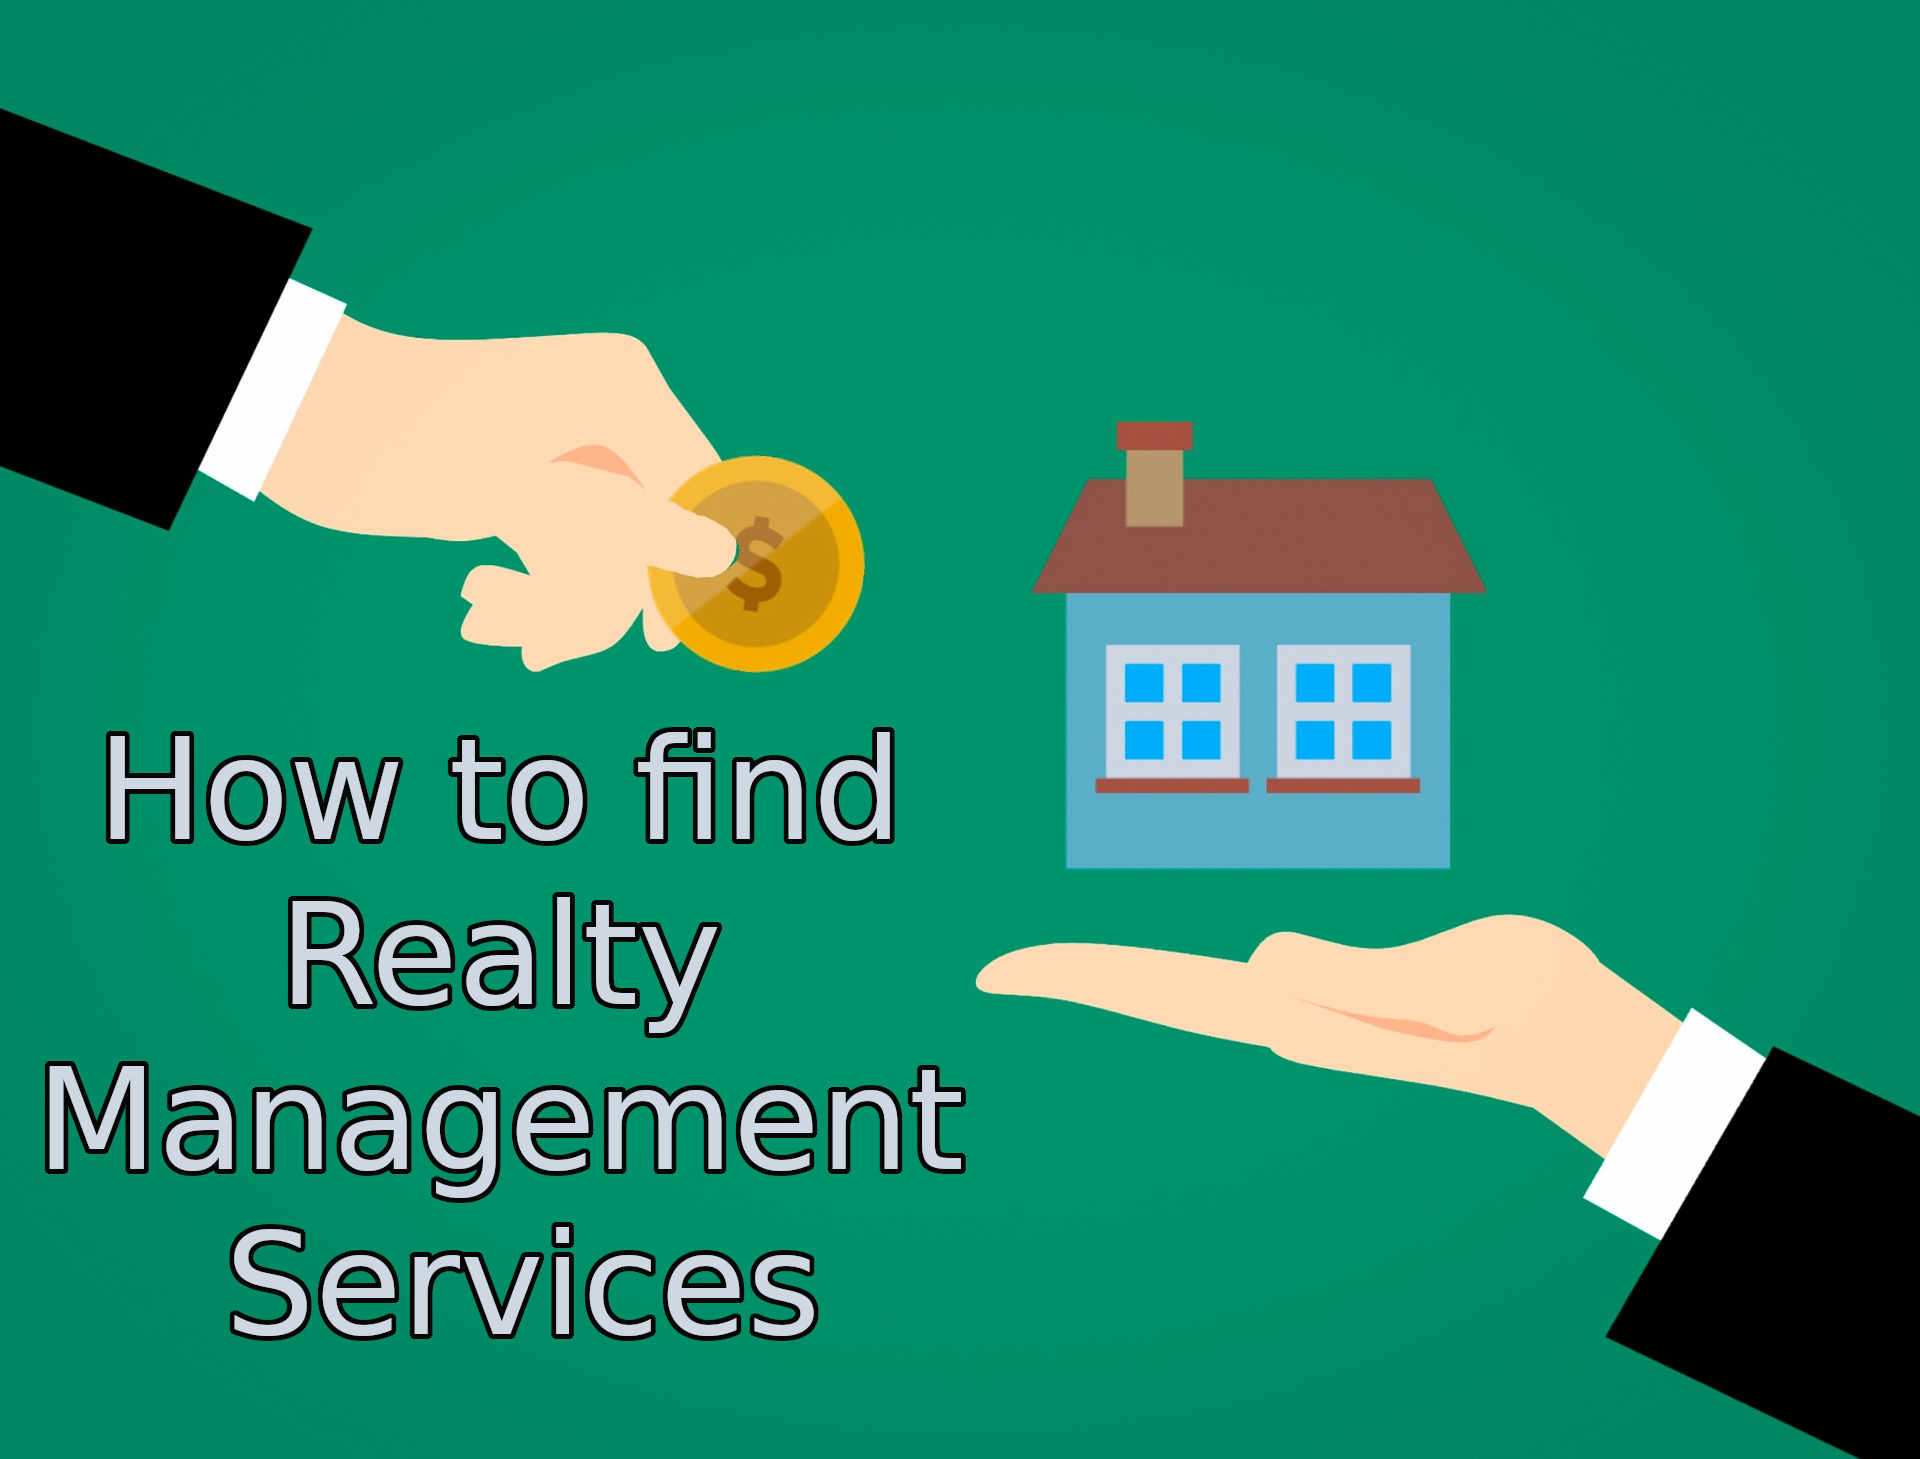 How to find Realty Management Services